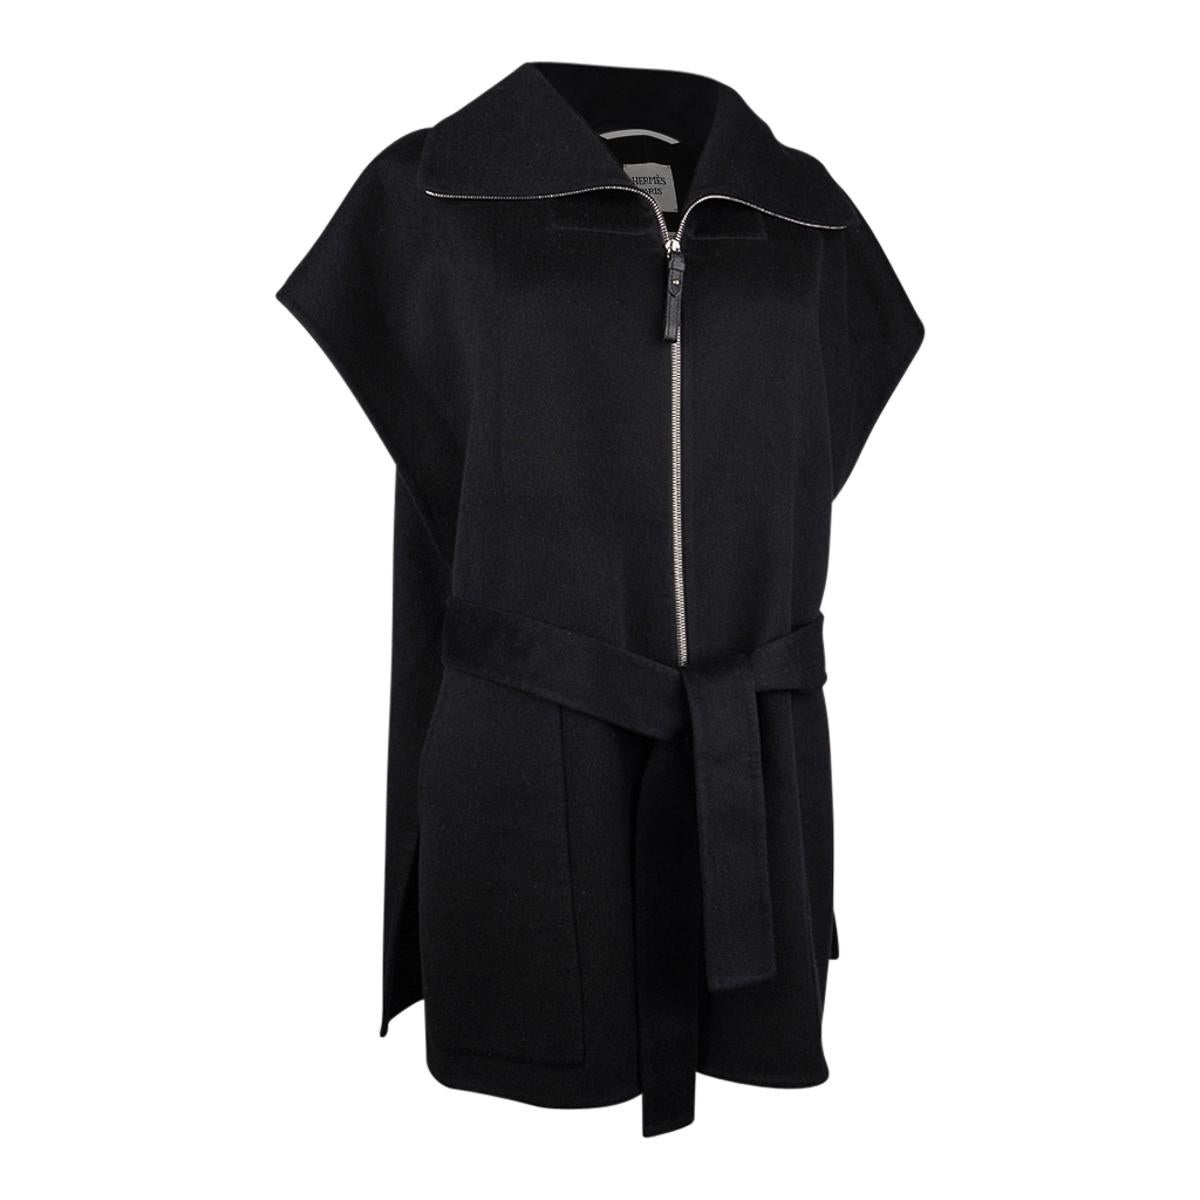 Mightychic offers an Hermes Short Vest featured in Black Double Face Cashmere.
Chic, versatile and timeless and can be worn numerous different ways.
Knotted belt leaves the rear unbelted with a swing coat effect.
Front zip with leather pull.
Funnel